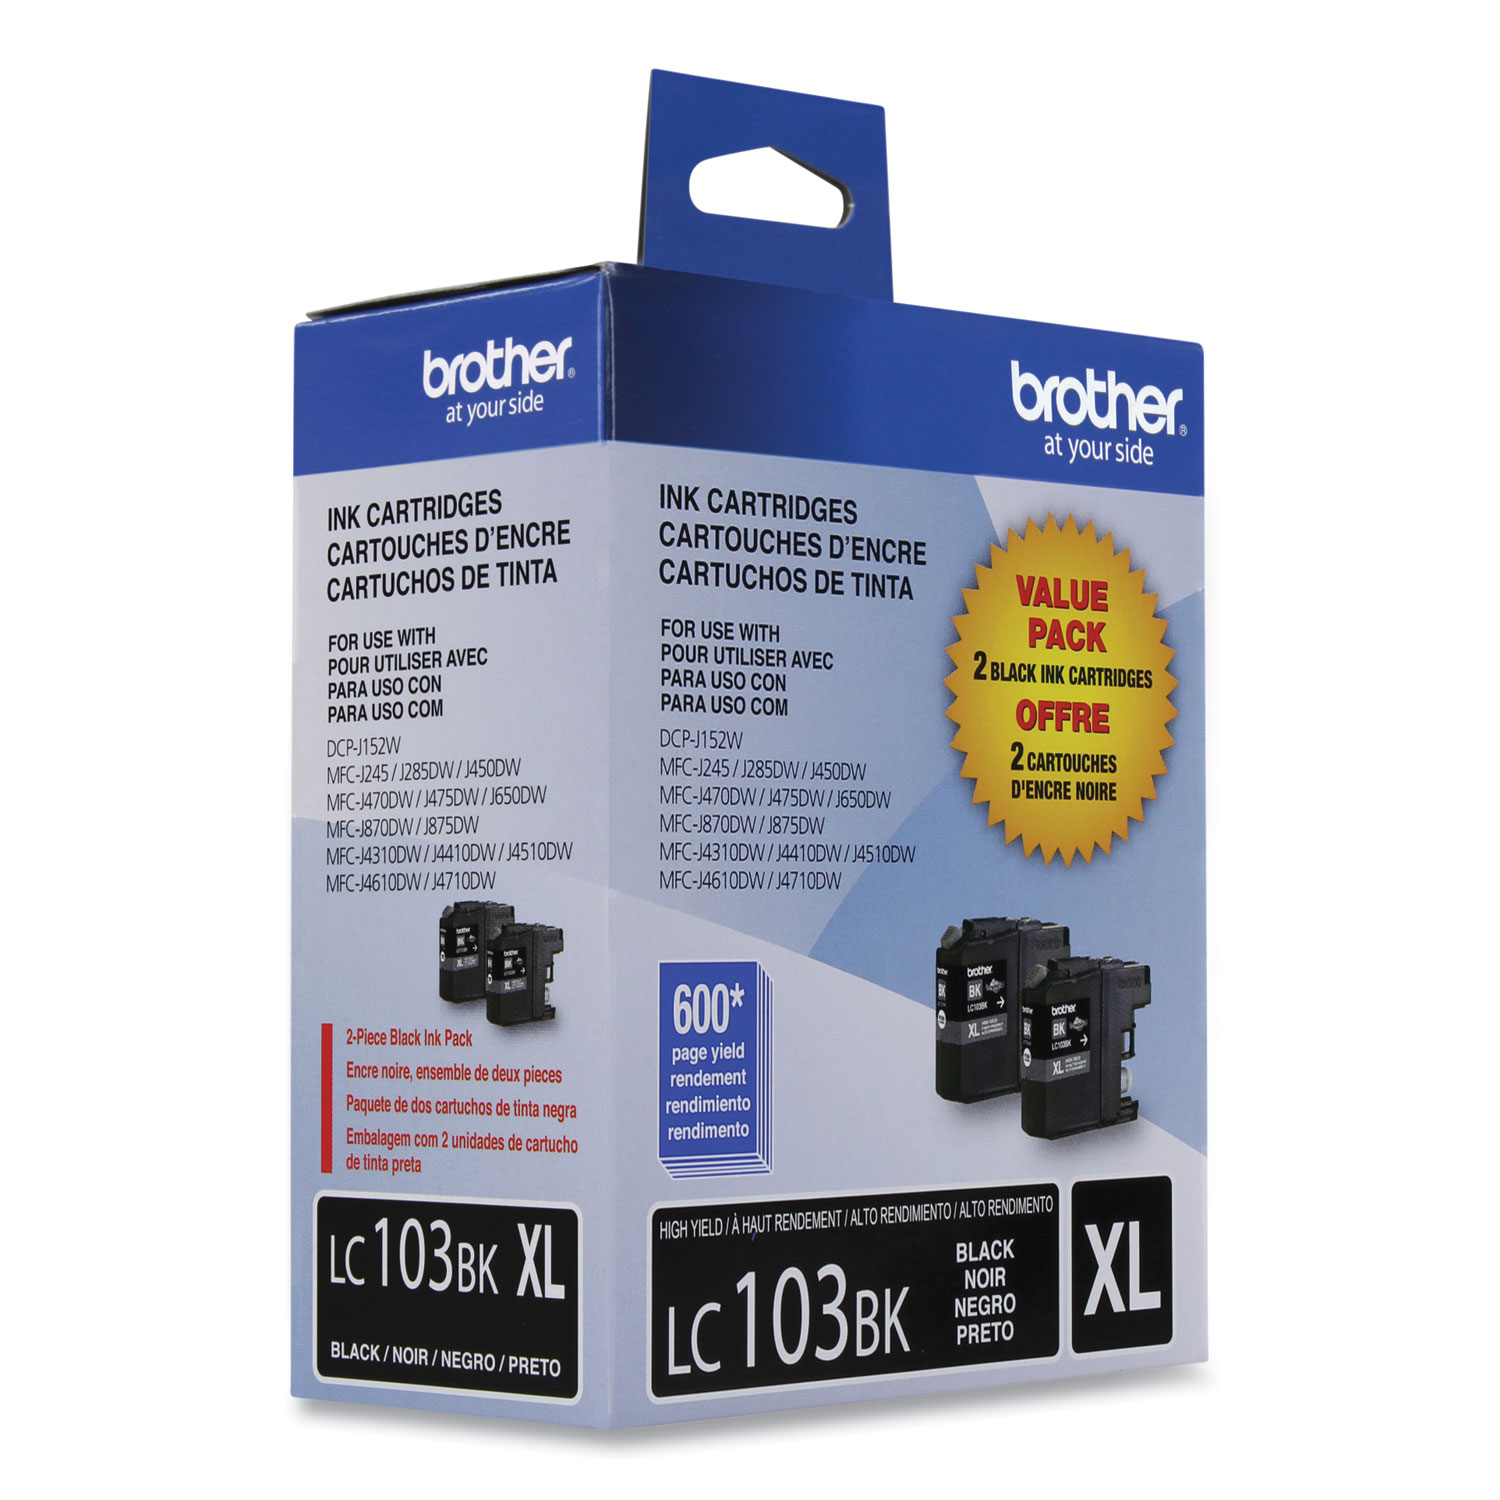 Brother MFC-J6720DW (LC109BK) Black Extra High Yield Ink Cartridge (2,400  Yield)